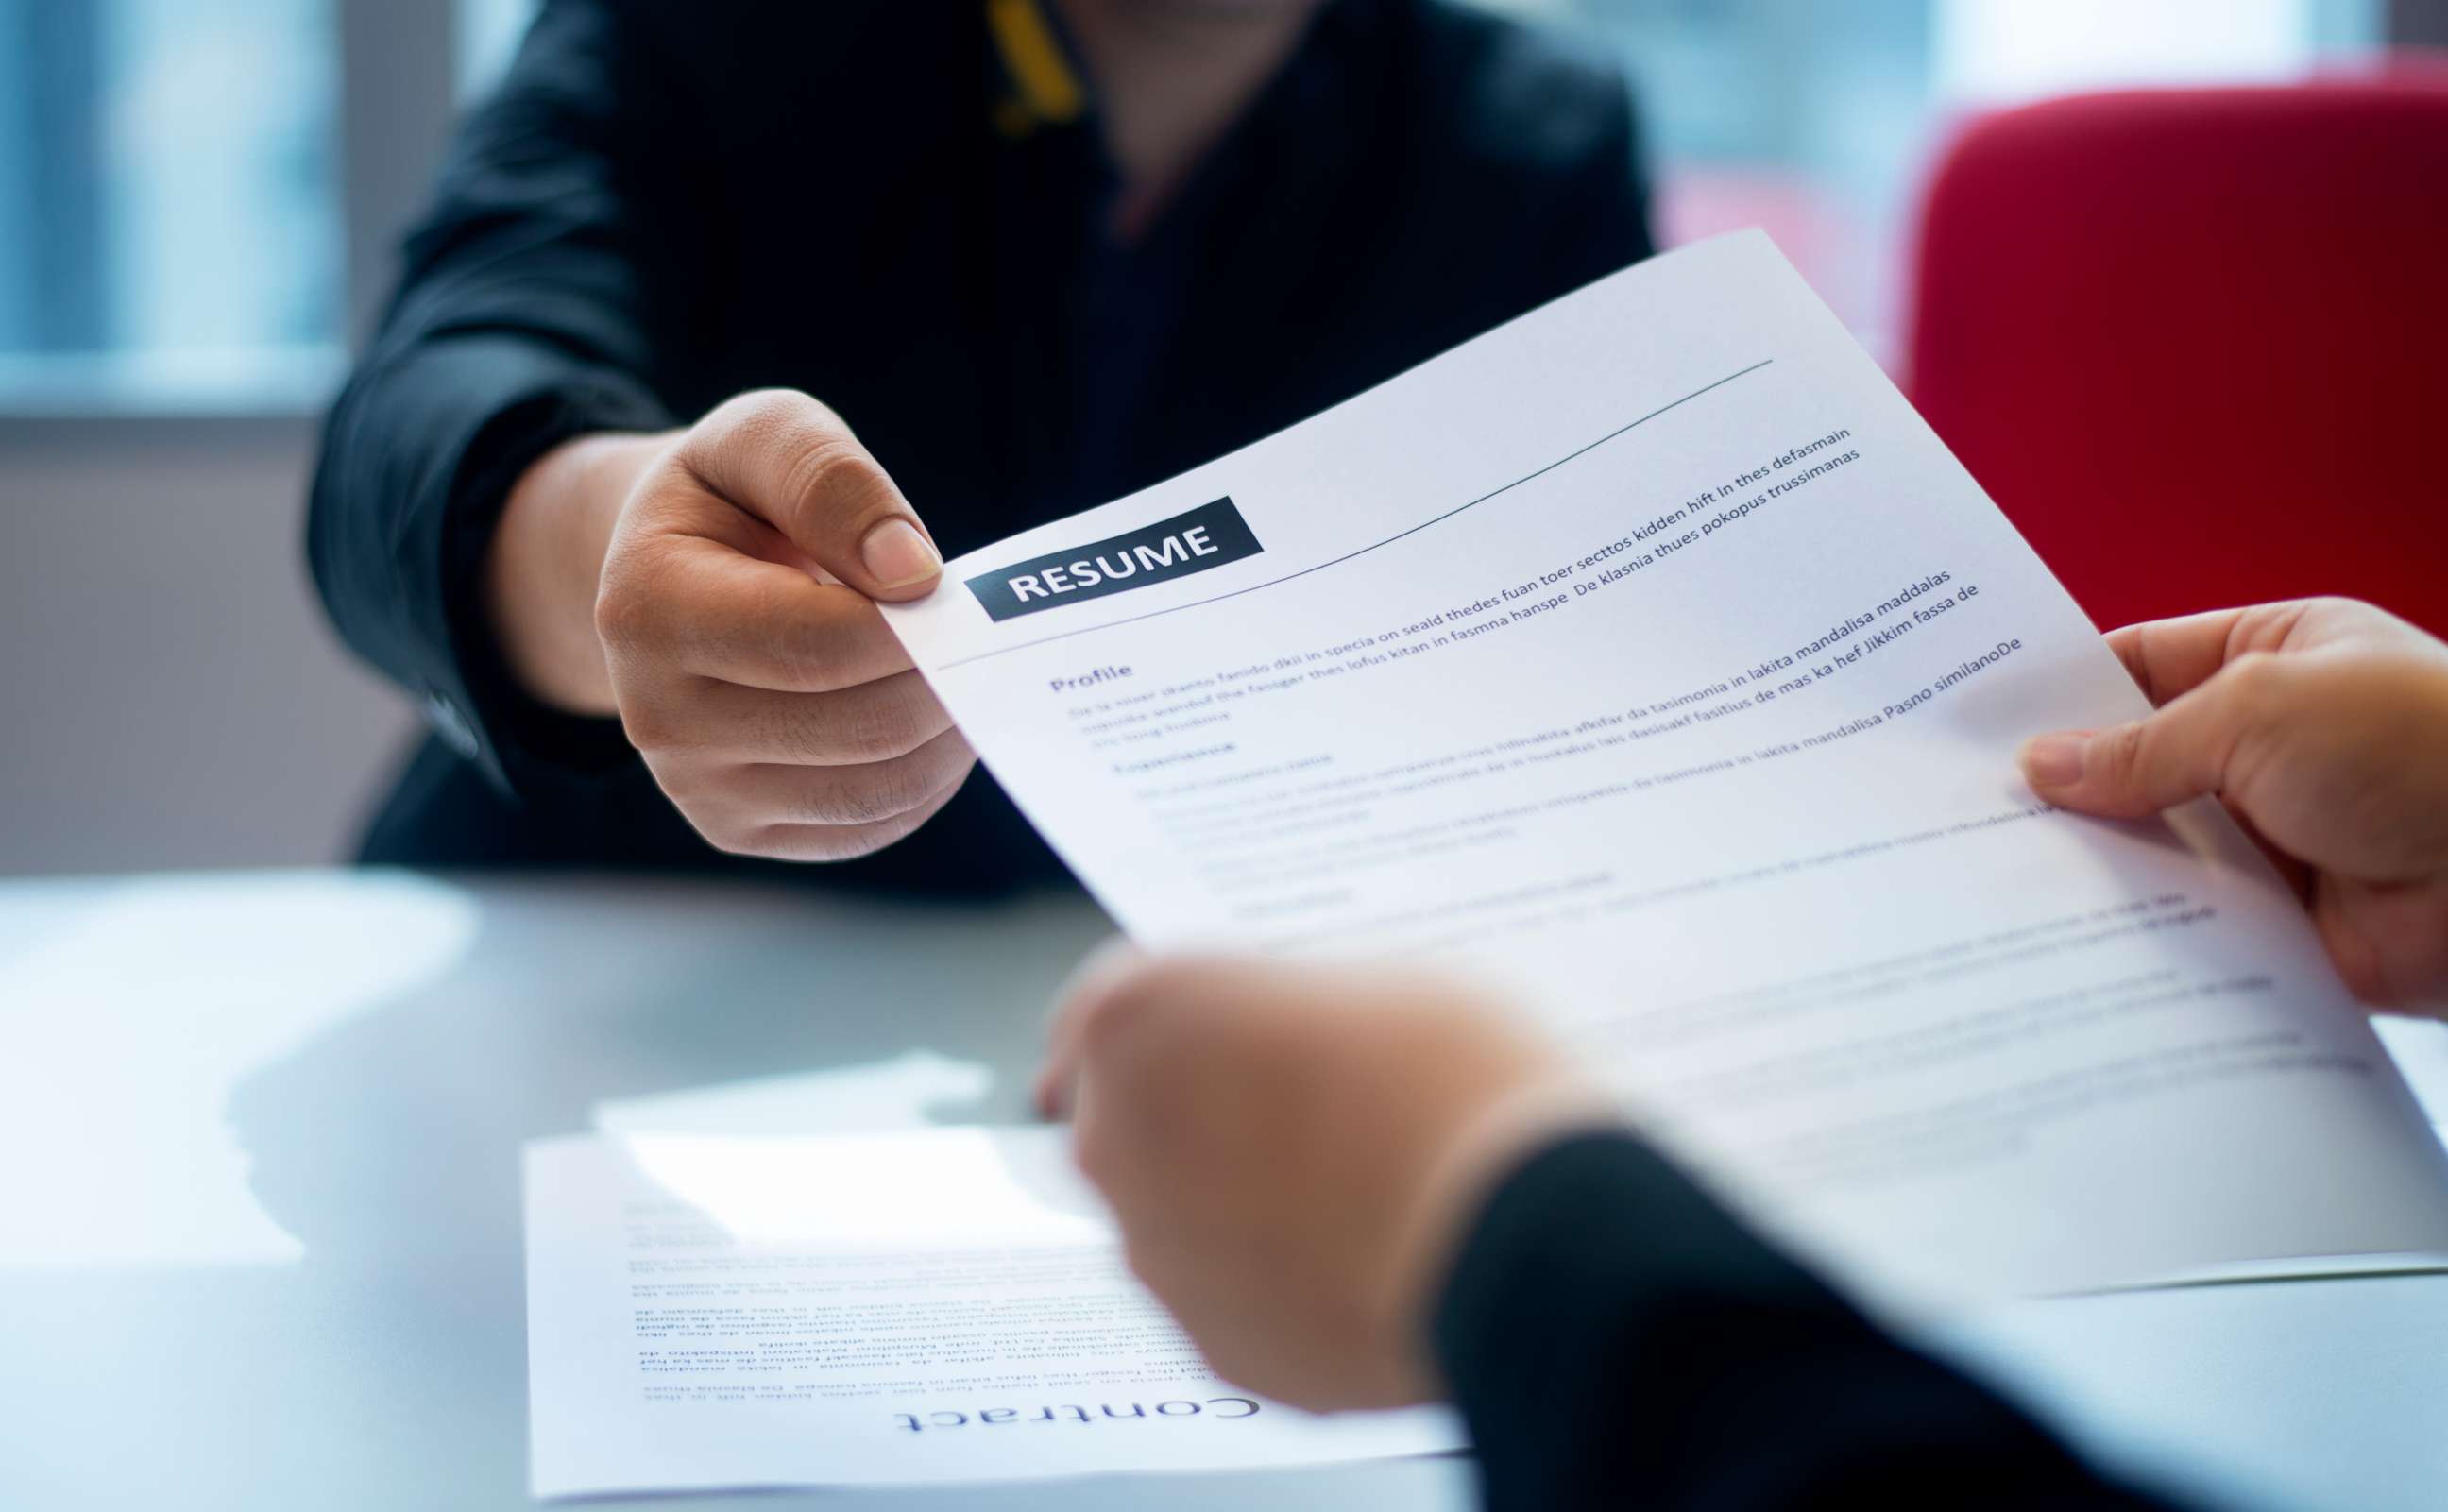 PHOTO: Stock photo of a resume being handed to an interviewer.